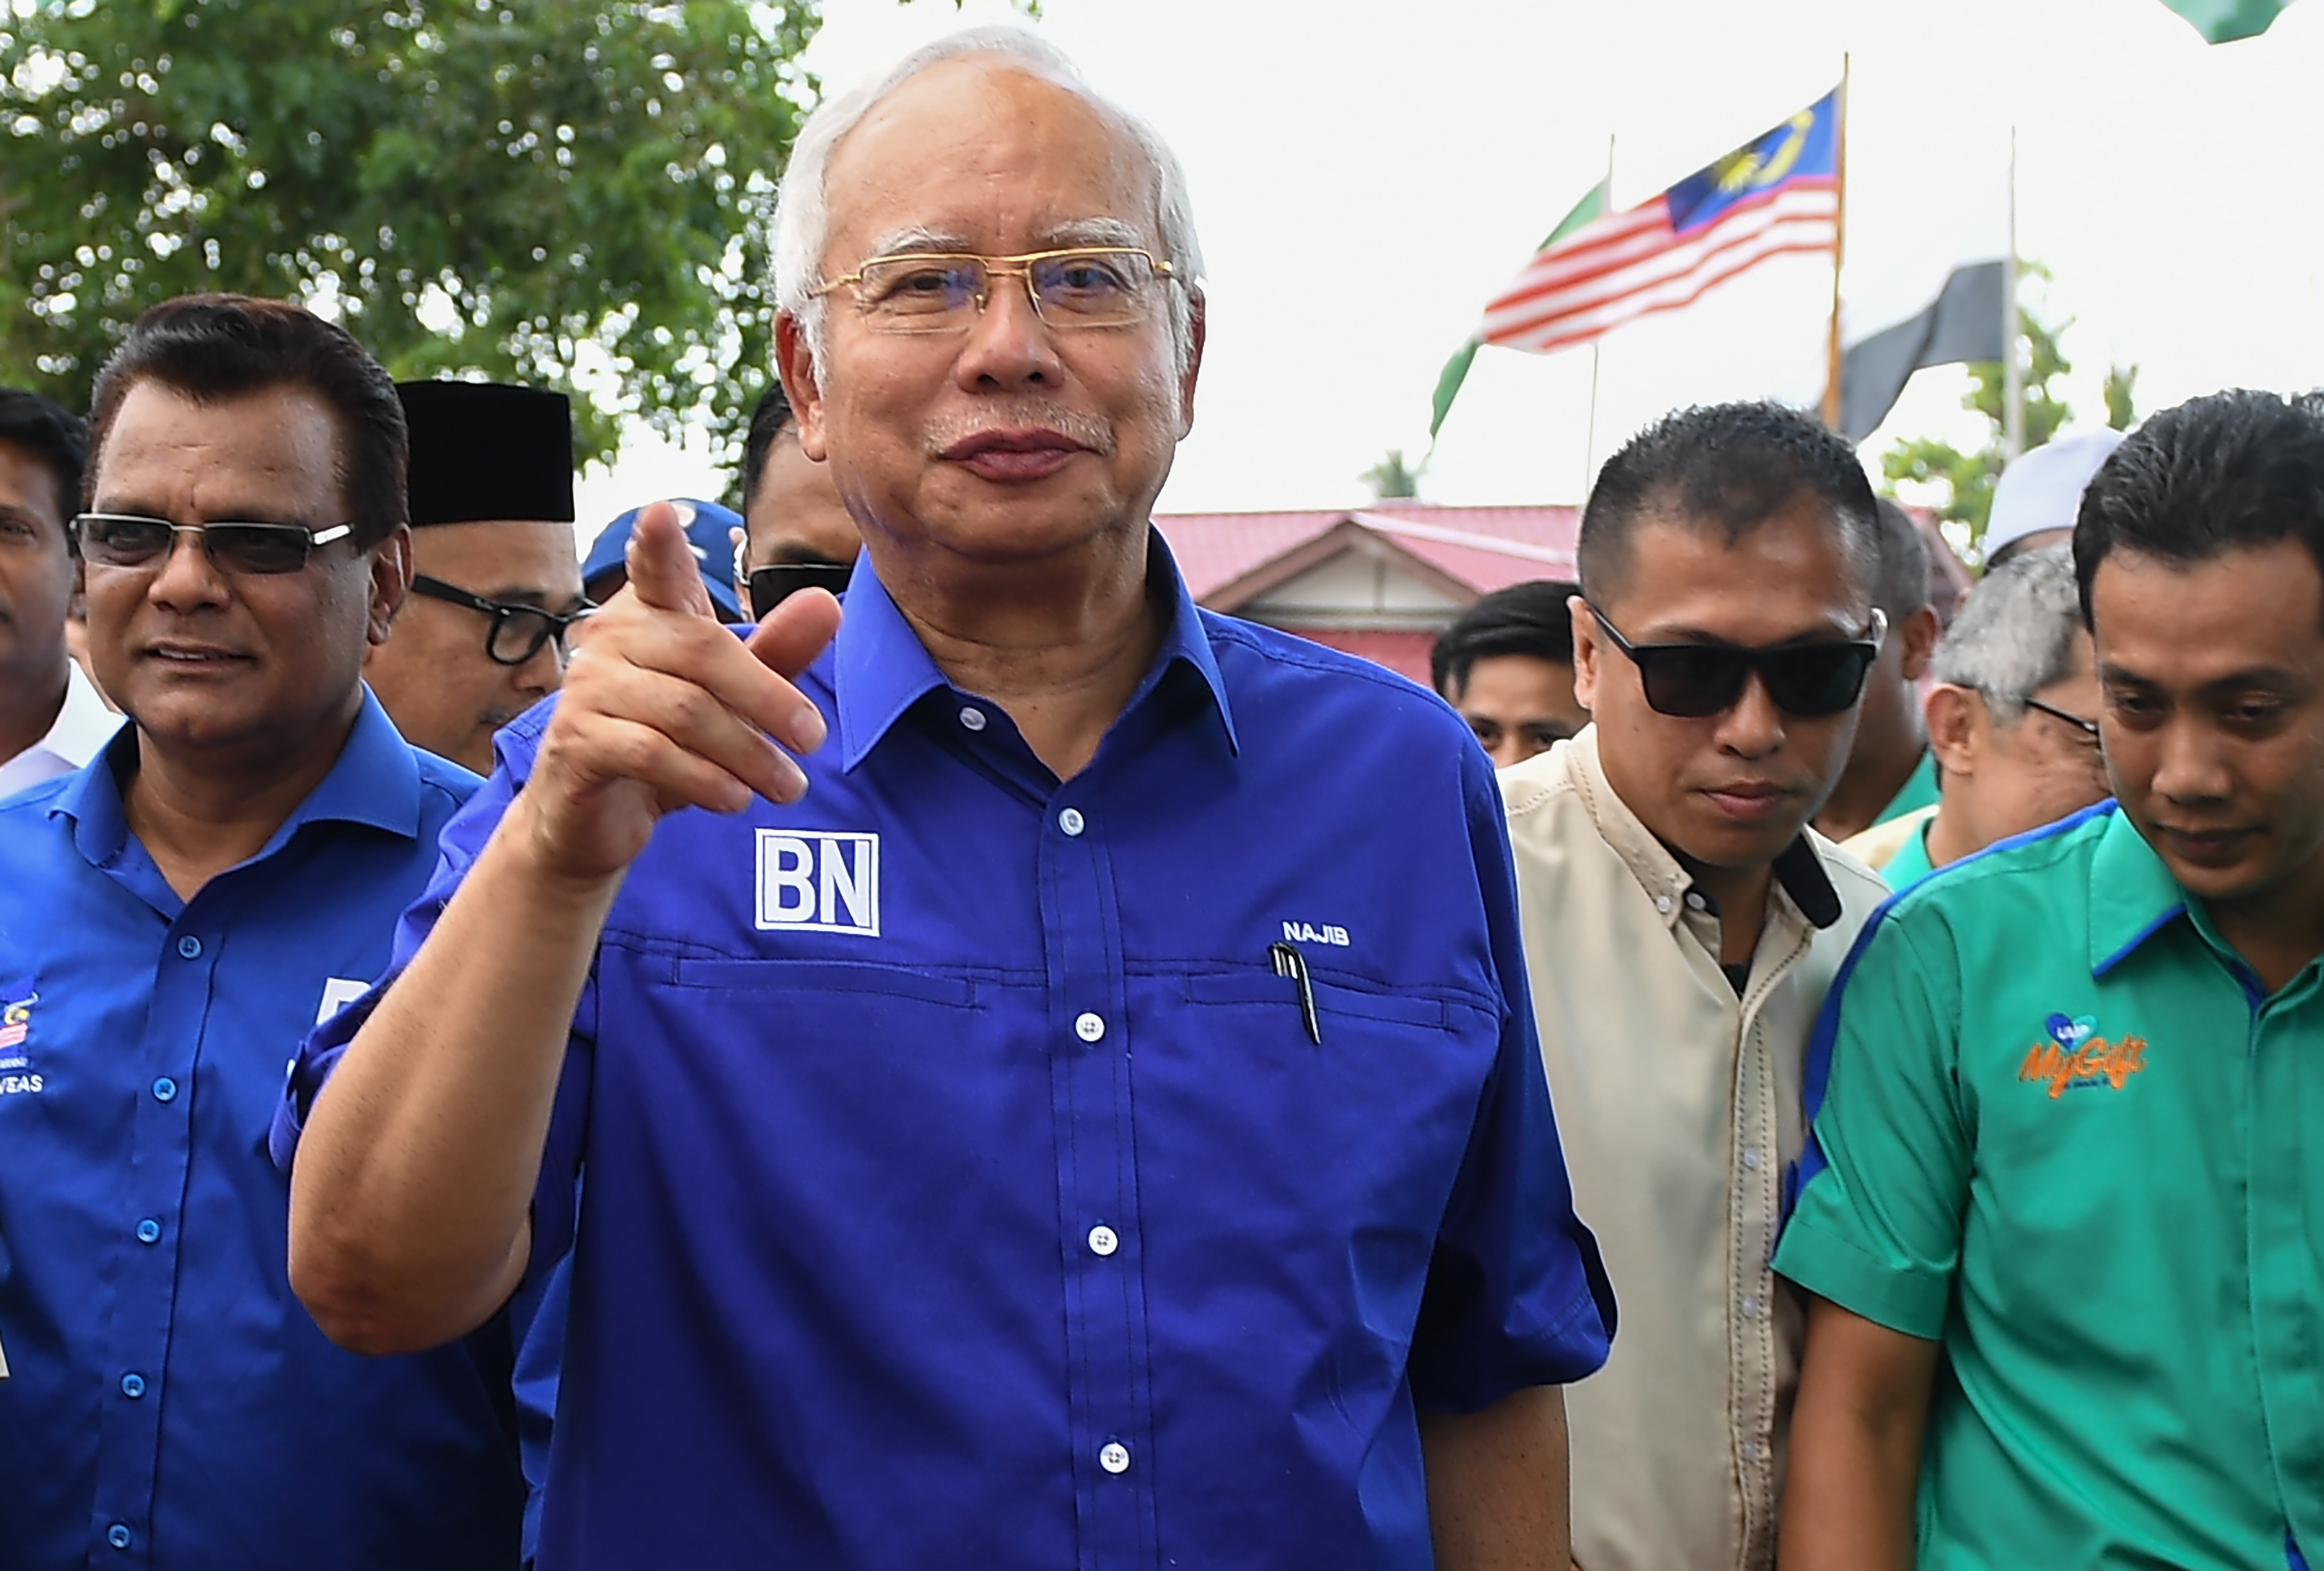 Malaysia's Prime Minister Najib Razak of the ruling coalition party Barisan Nasional arrives during a campaign event ahead of the upcoming 14th general election in Pekan, Pahang on May 8, 2018. (Mohd Rasfan—AFP/Getty Images)